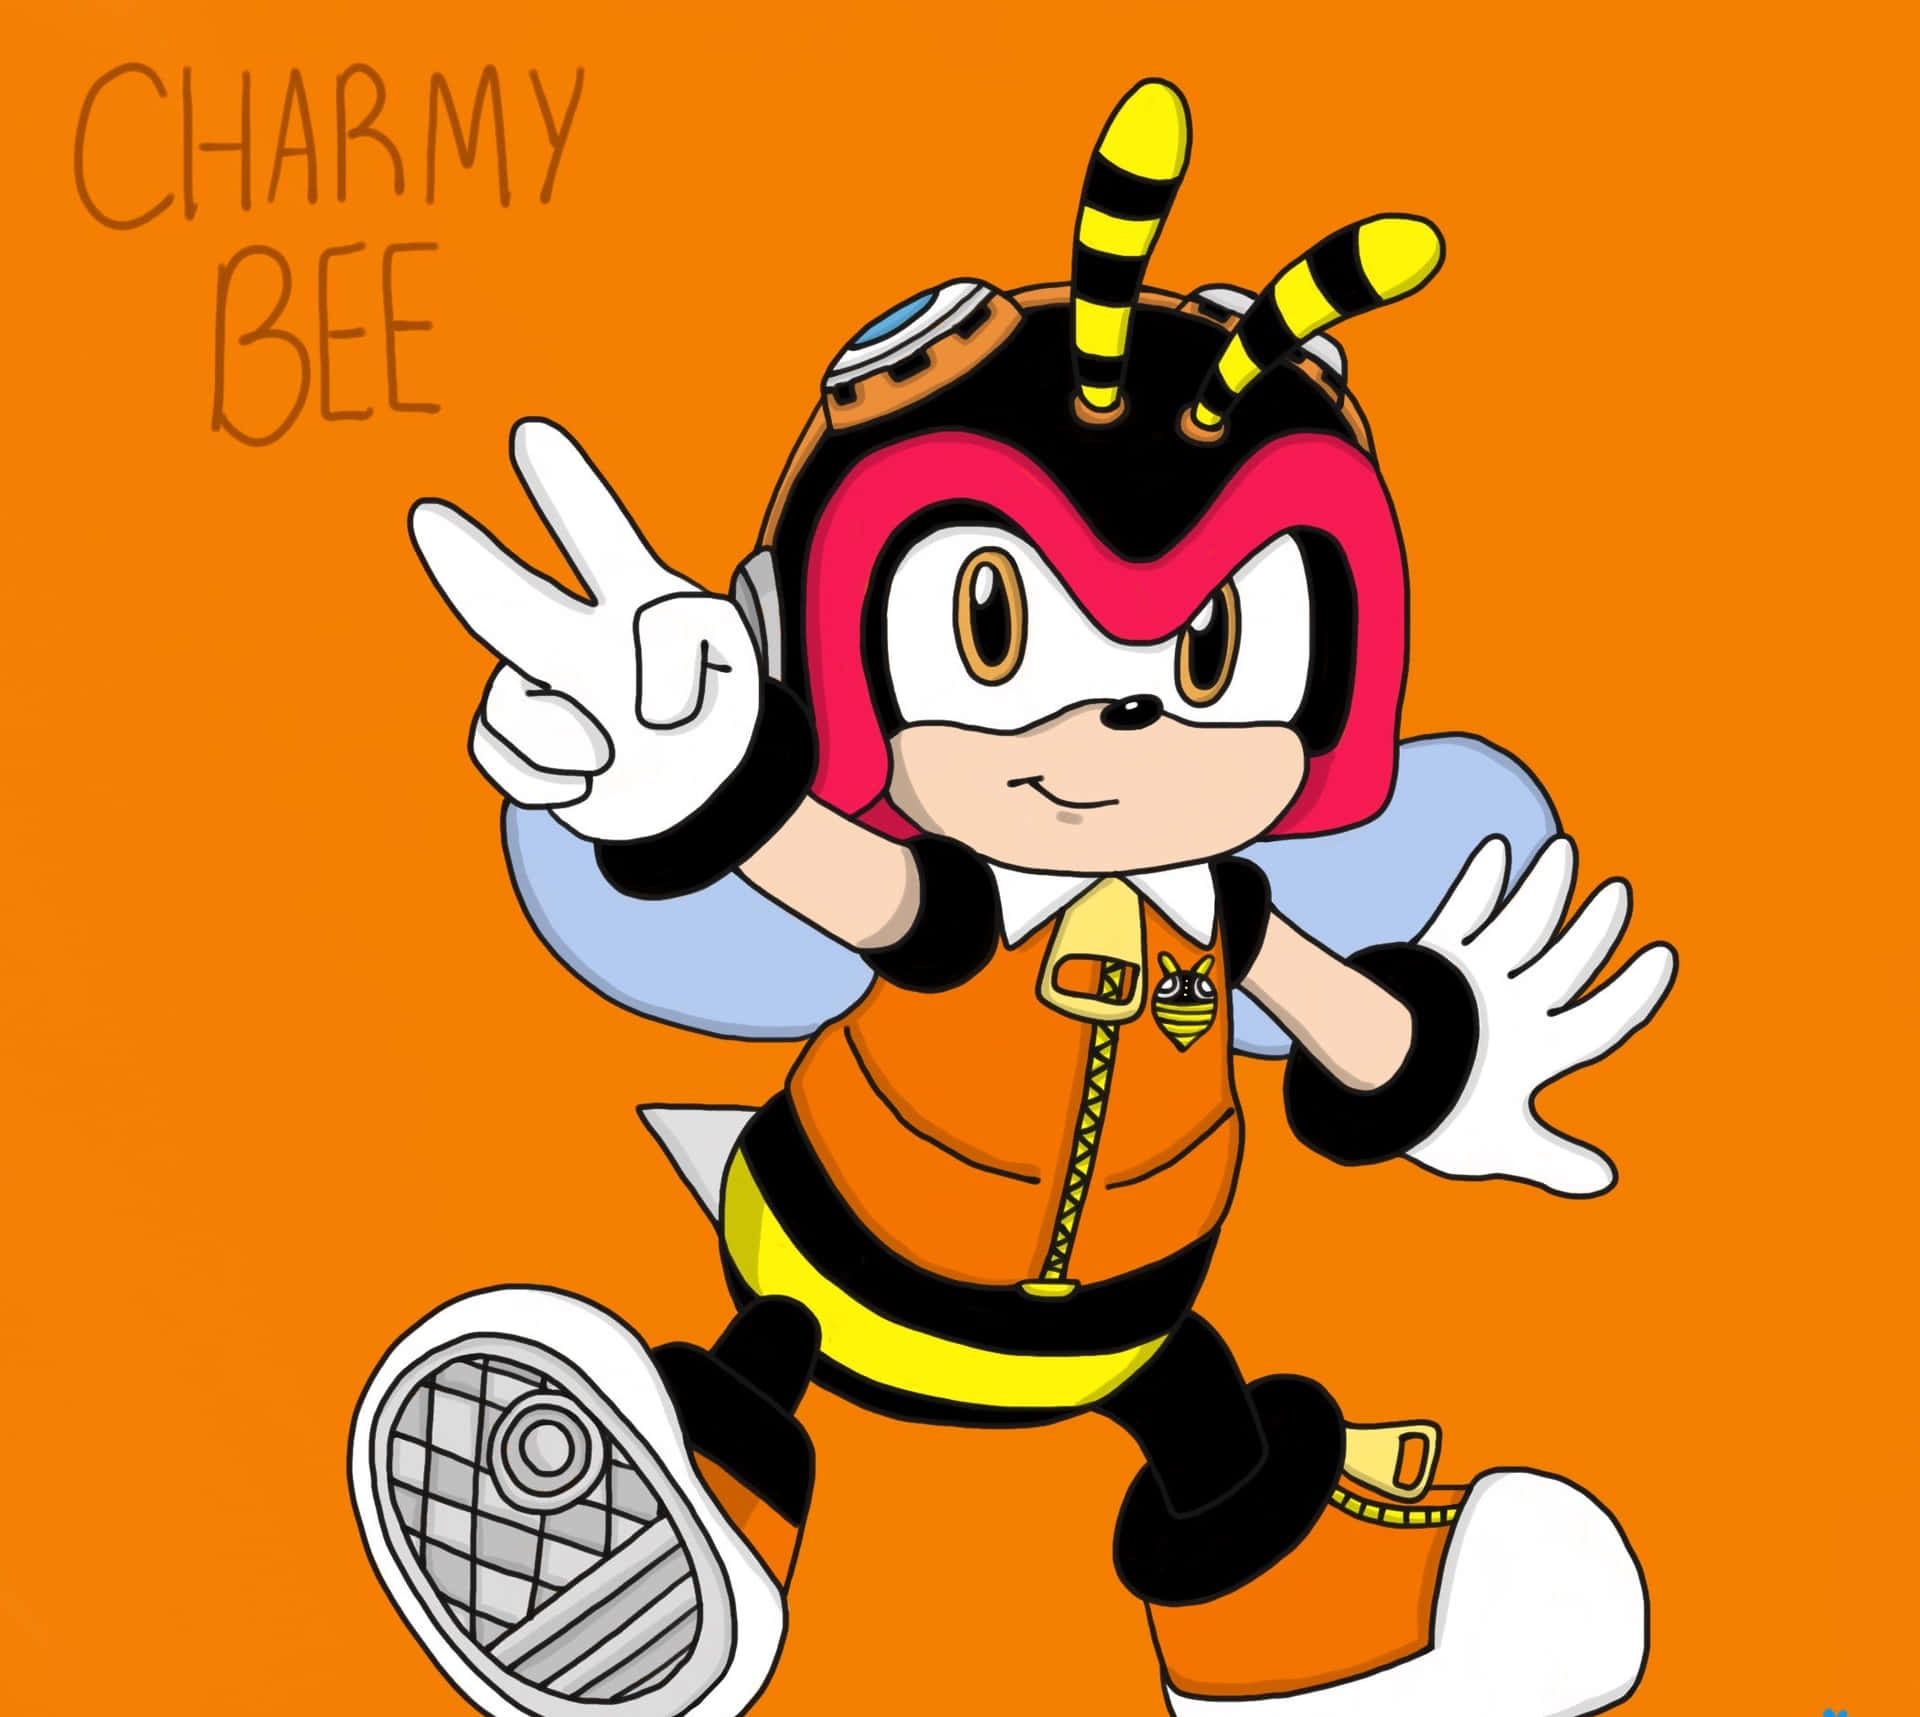 Charmy Bee: The Energetic Flying Detective Wallpaper